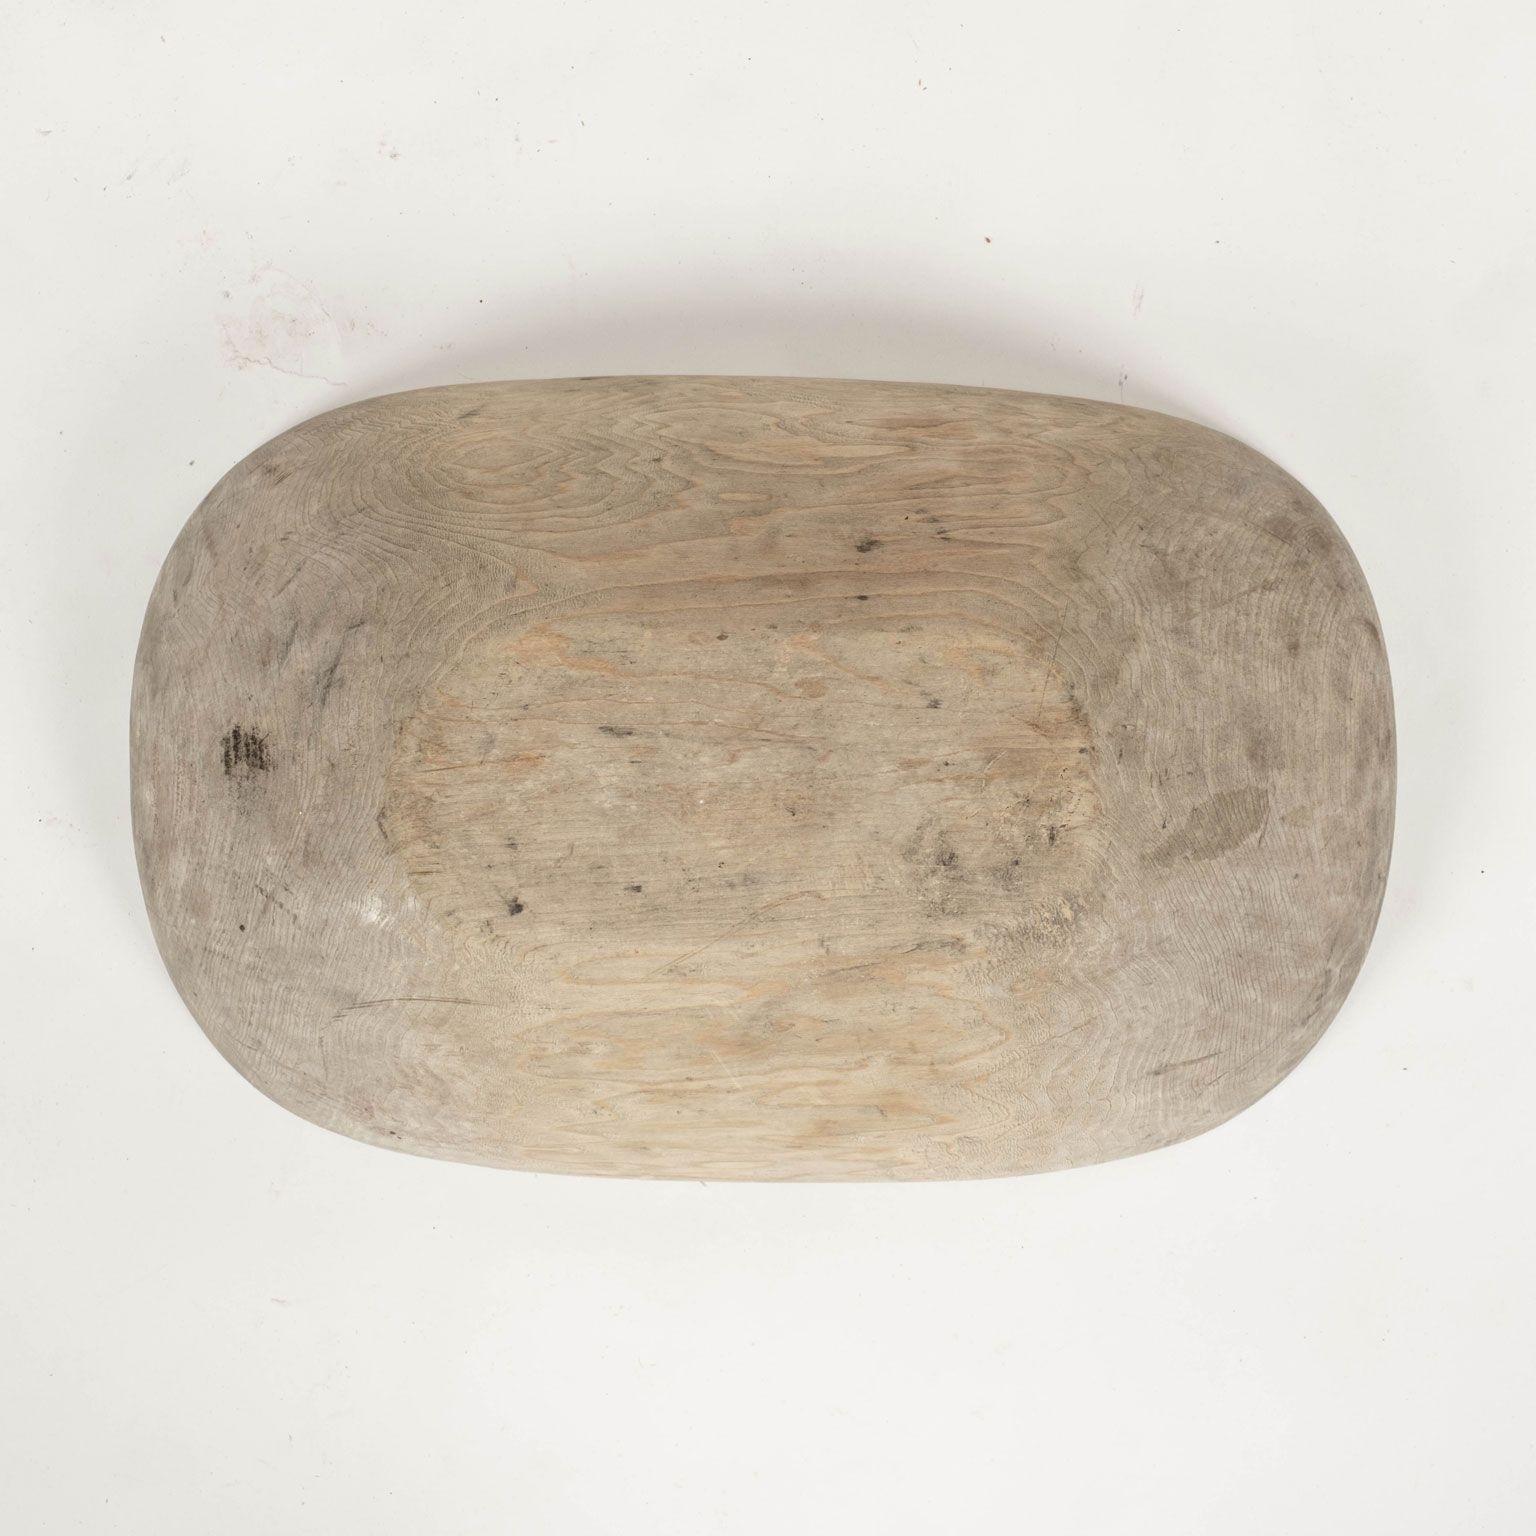 Trencher-Shaped Rustic Swedish Dug Out Bowl For Sale 2